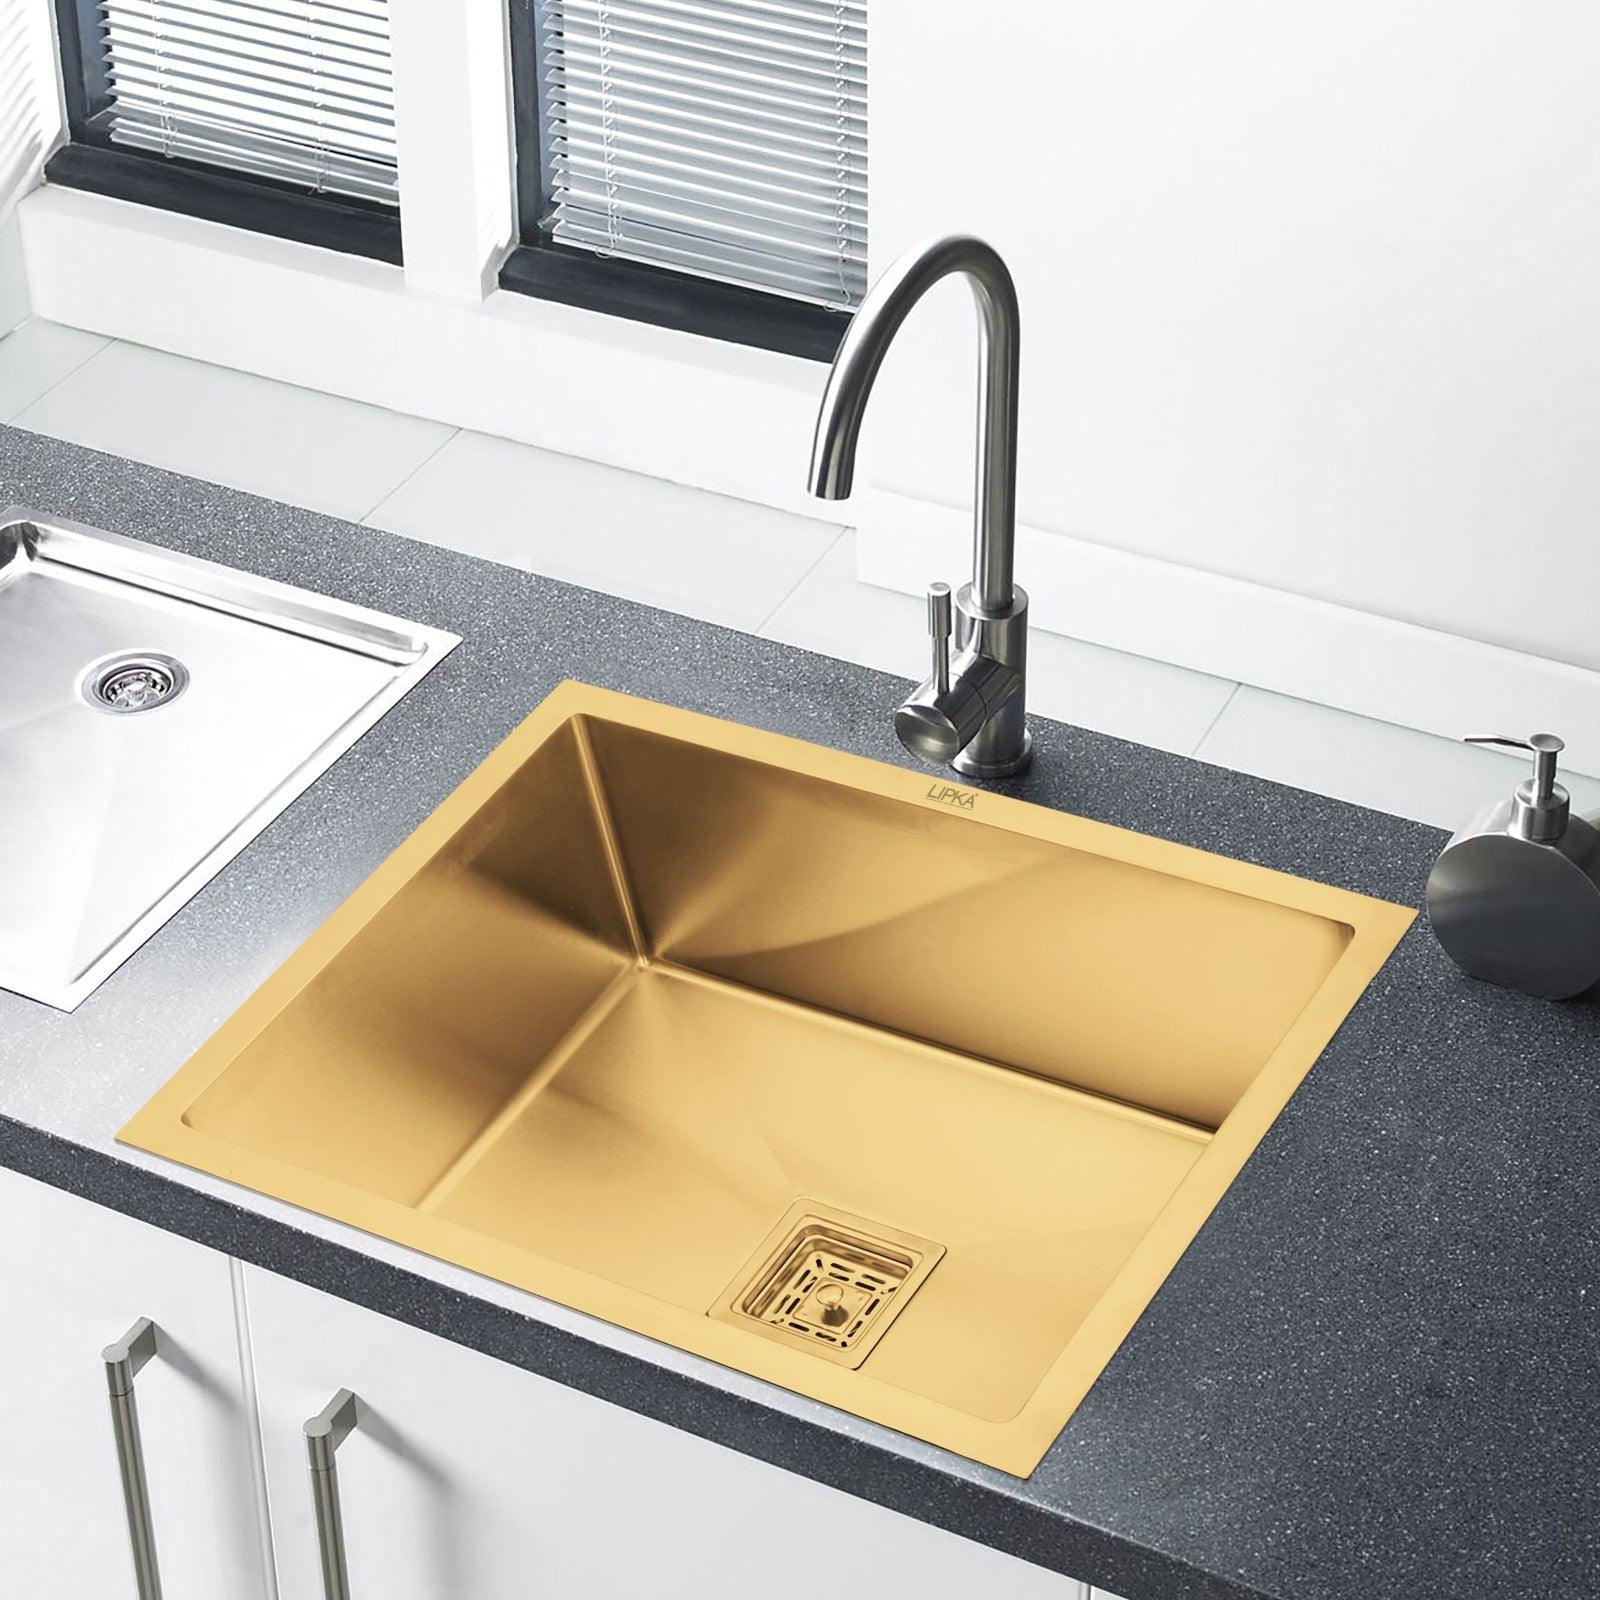 Handmade Yellow Gold PVD Coated Single Bowl Kitchen Sink (24 x 18 x 10 Inches) - LIPKA